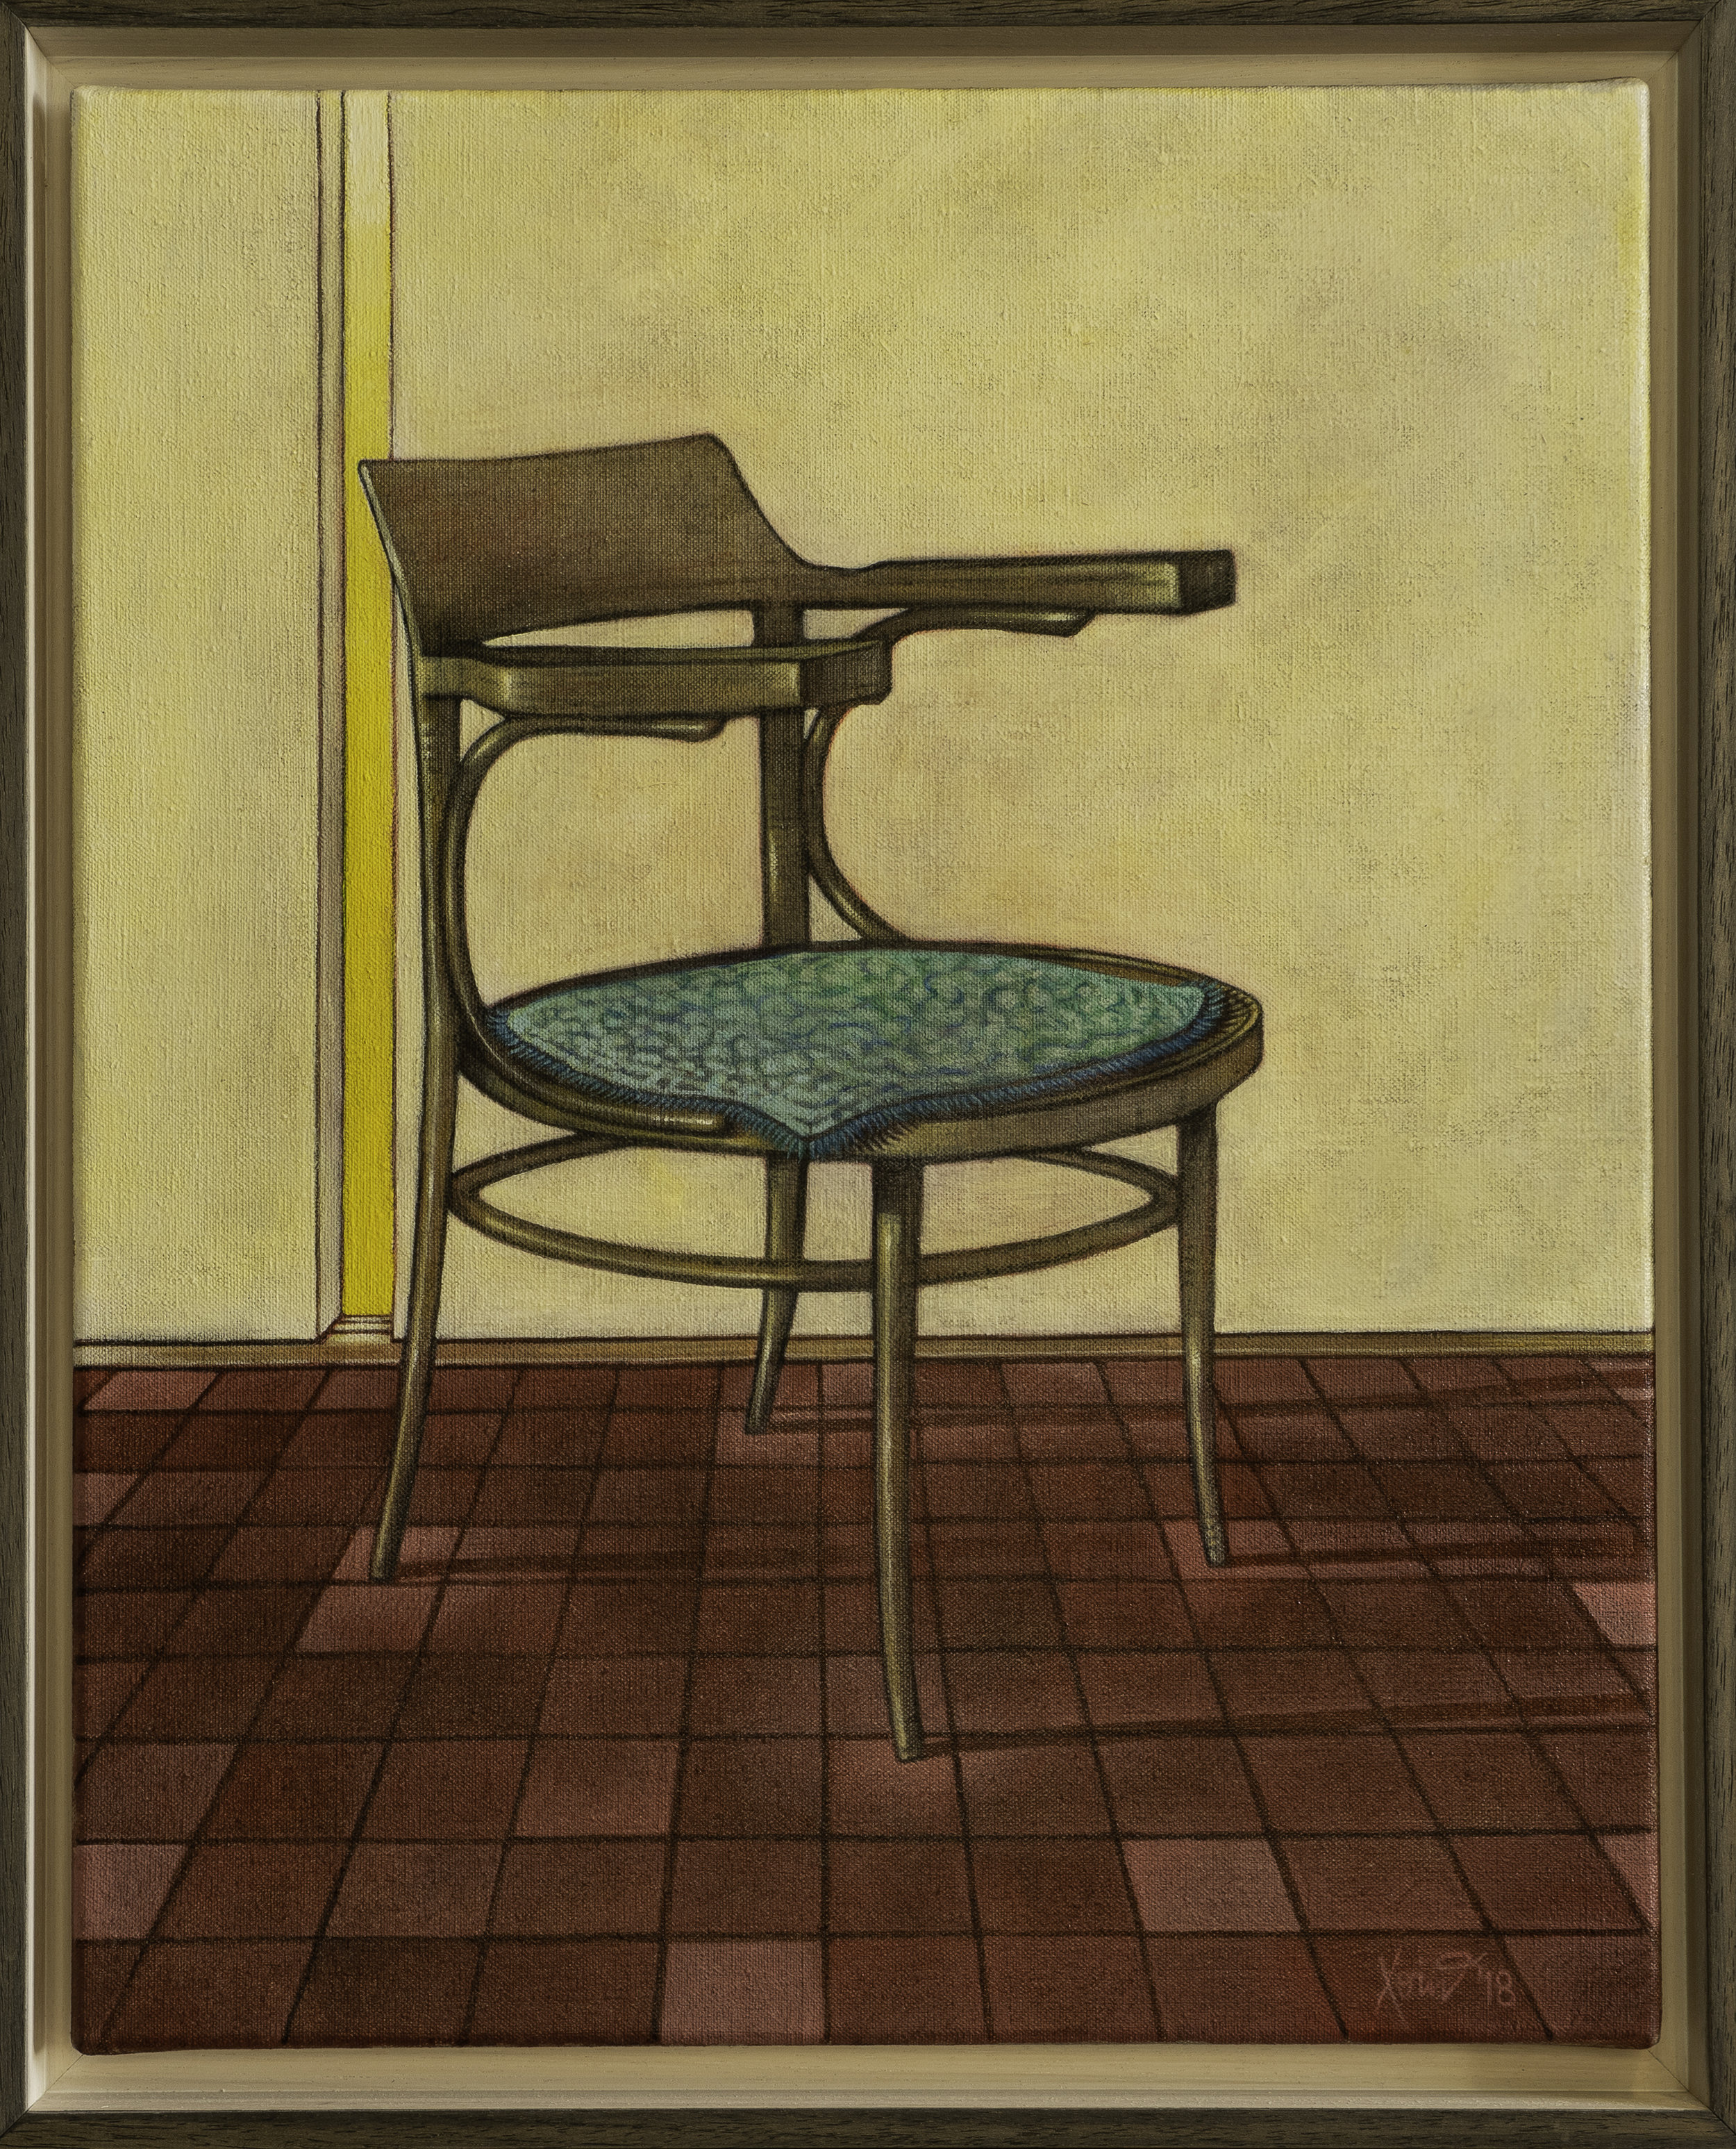 "Kitchen Chair" 40cm x50cm (framed) Charcoal and acrylic on Linen, 2018.